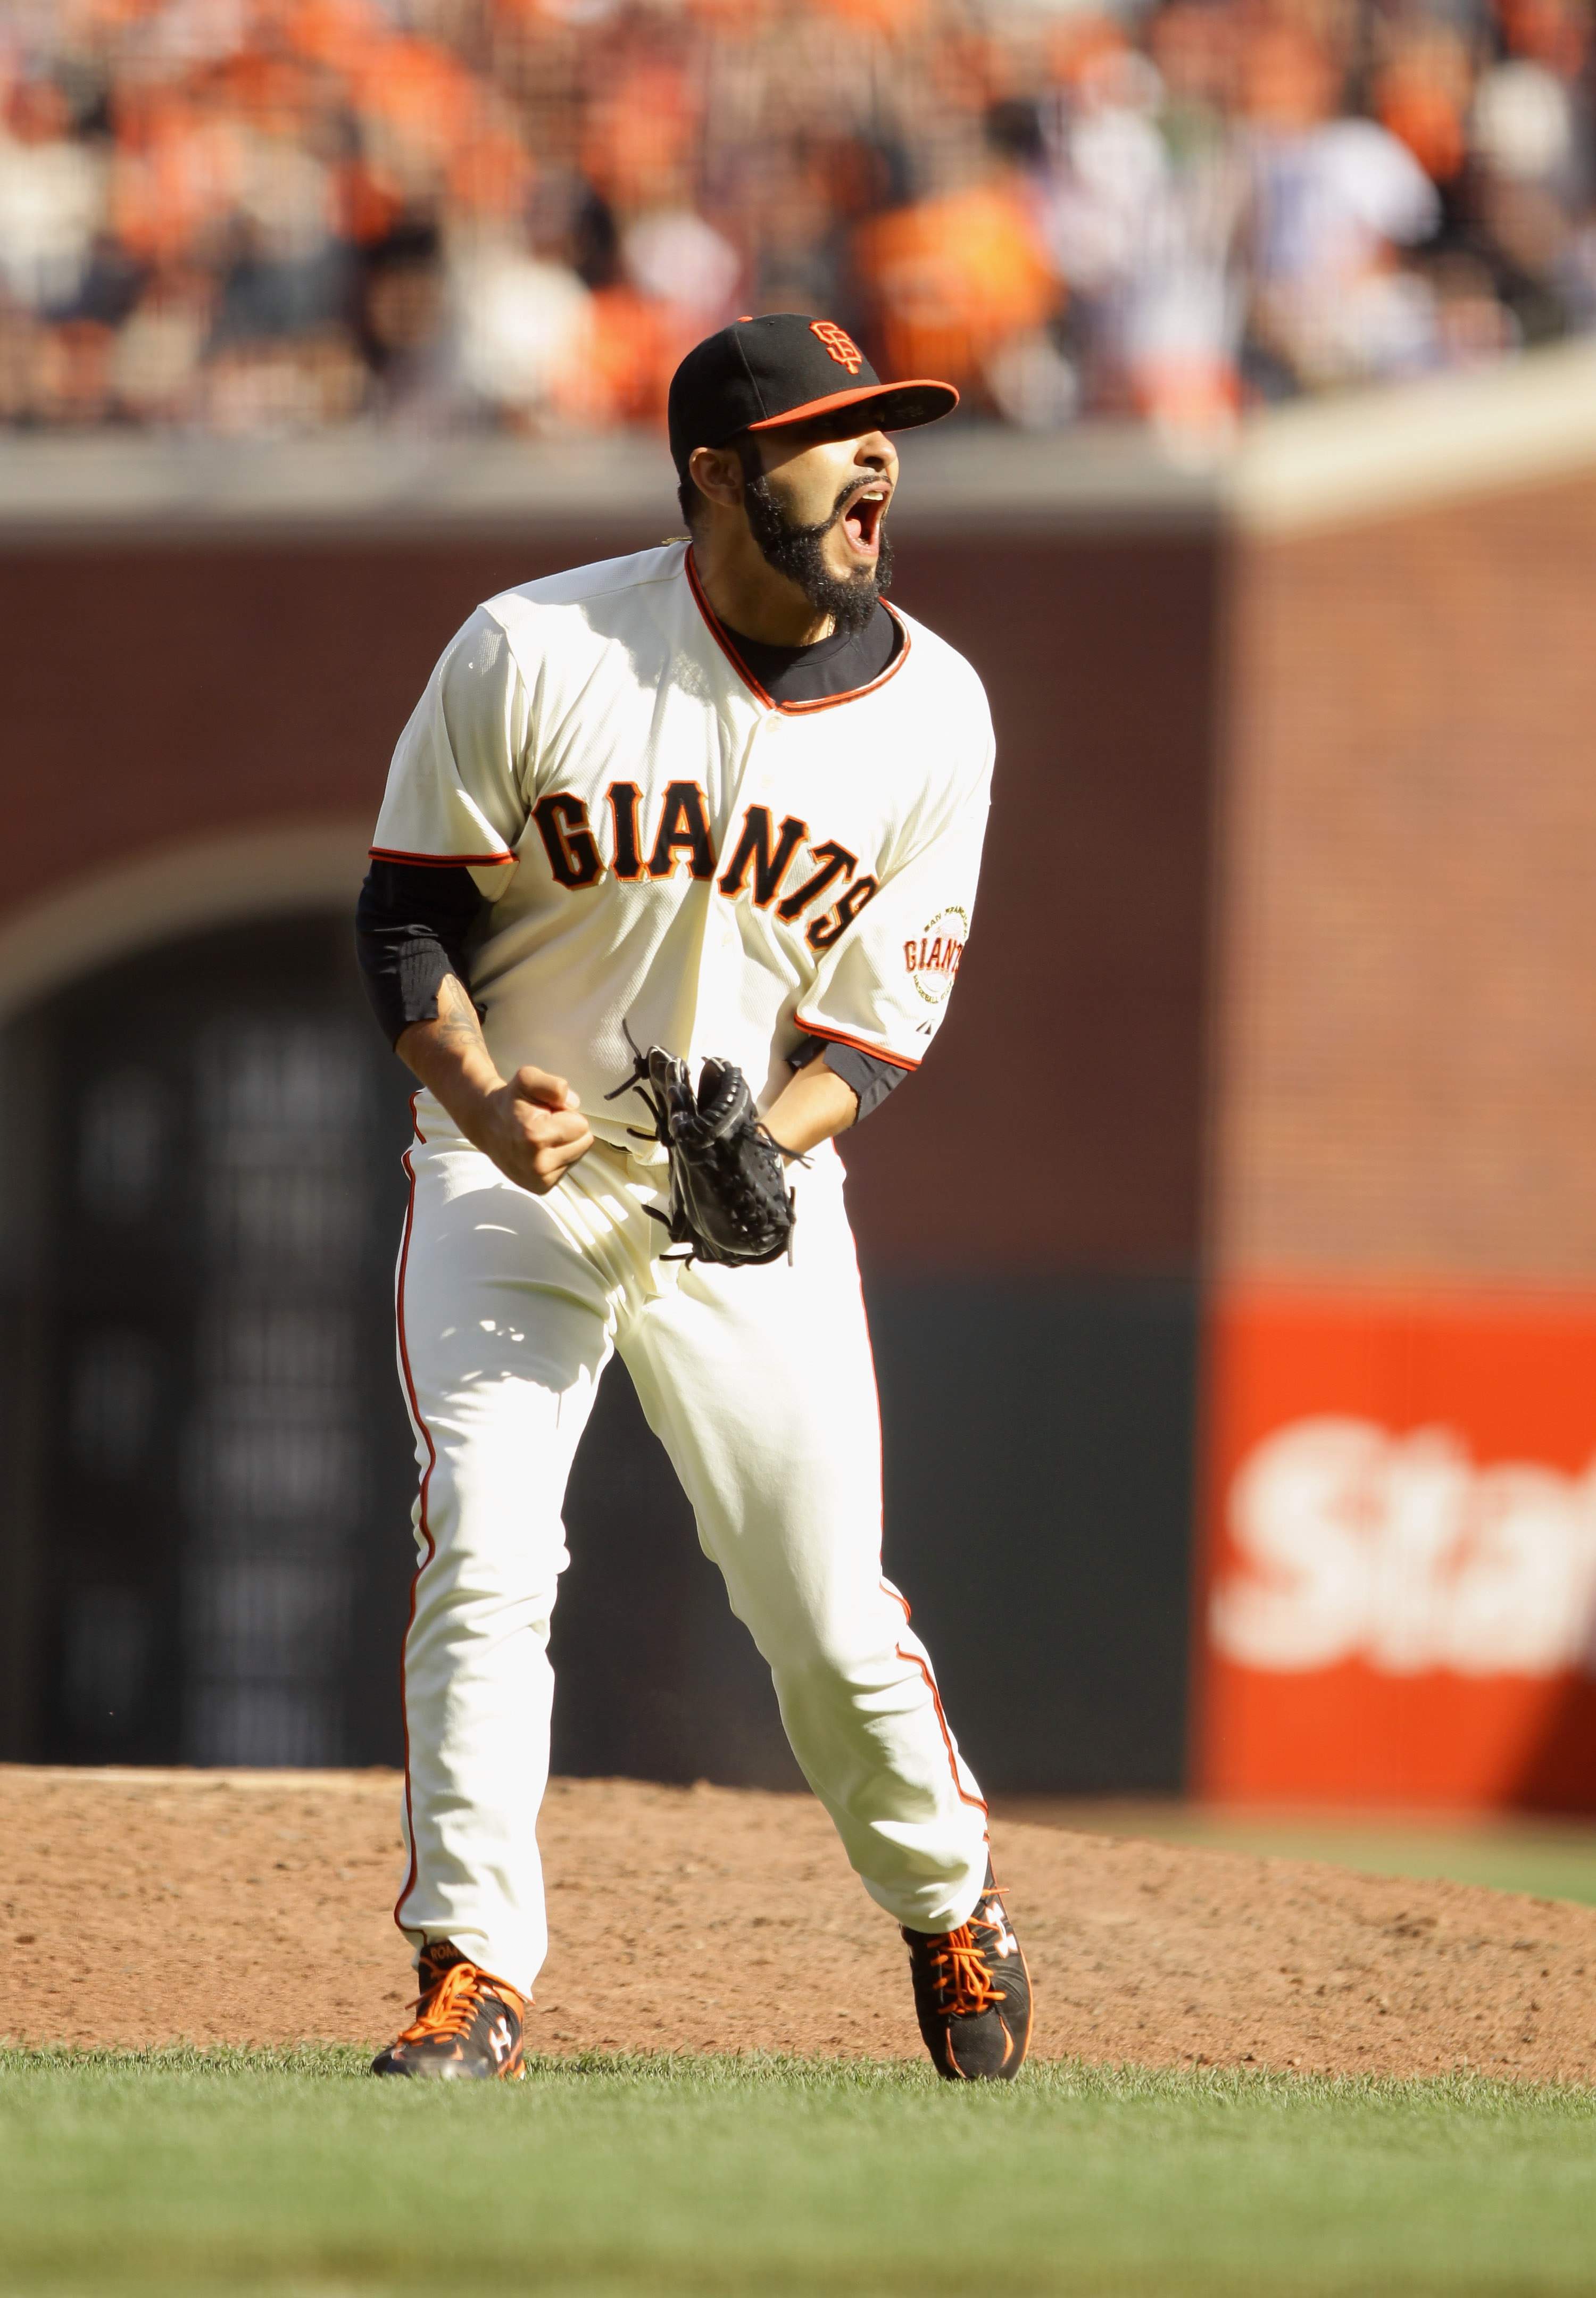 SAN FRANCISCO - OCTOBER 03:  Sergio Romo #45 of the San Francisco Giants celebrates after the end of the top of the eighth inning of their game against the San Diego Padres at AT&T Park on October 3, 2010 in San Francisco, California.  (Photo by Ezra Shaw